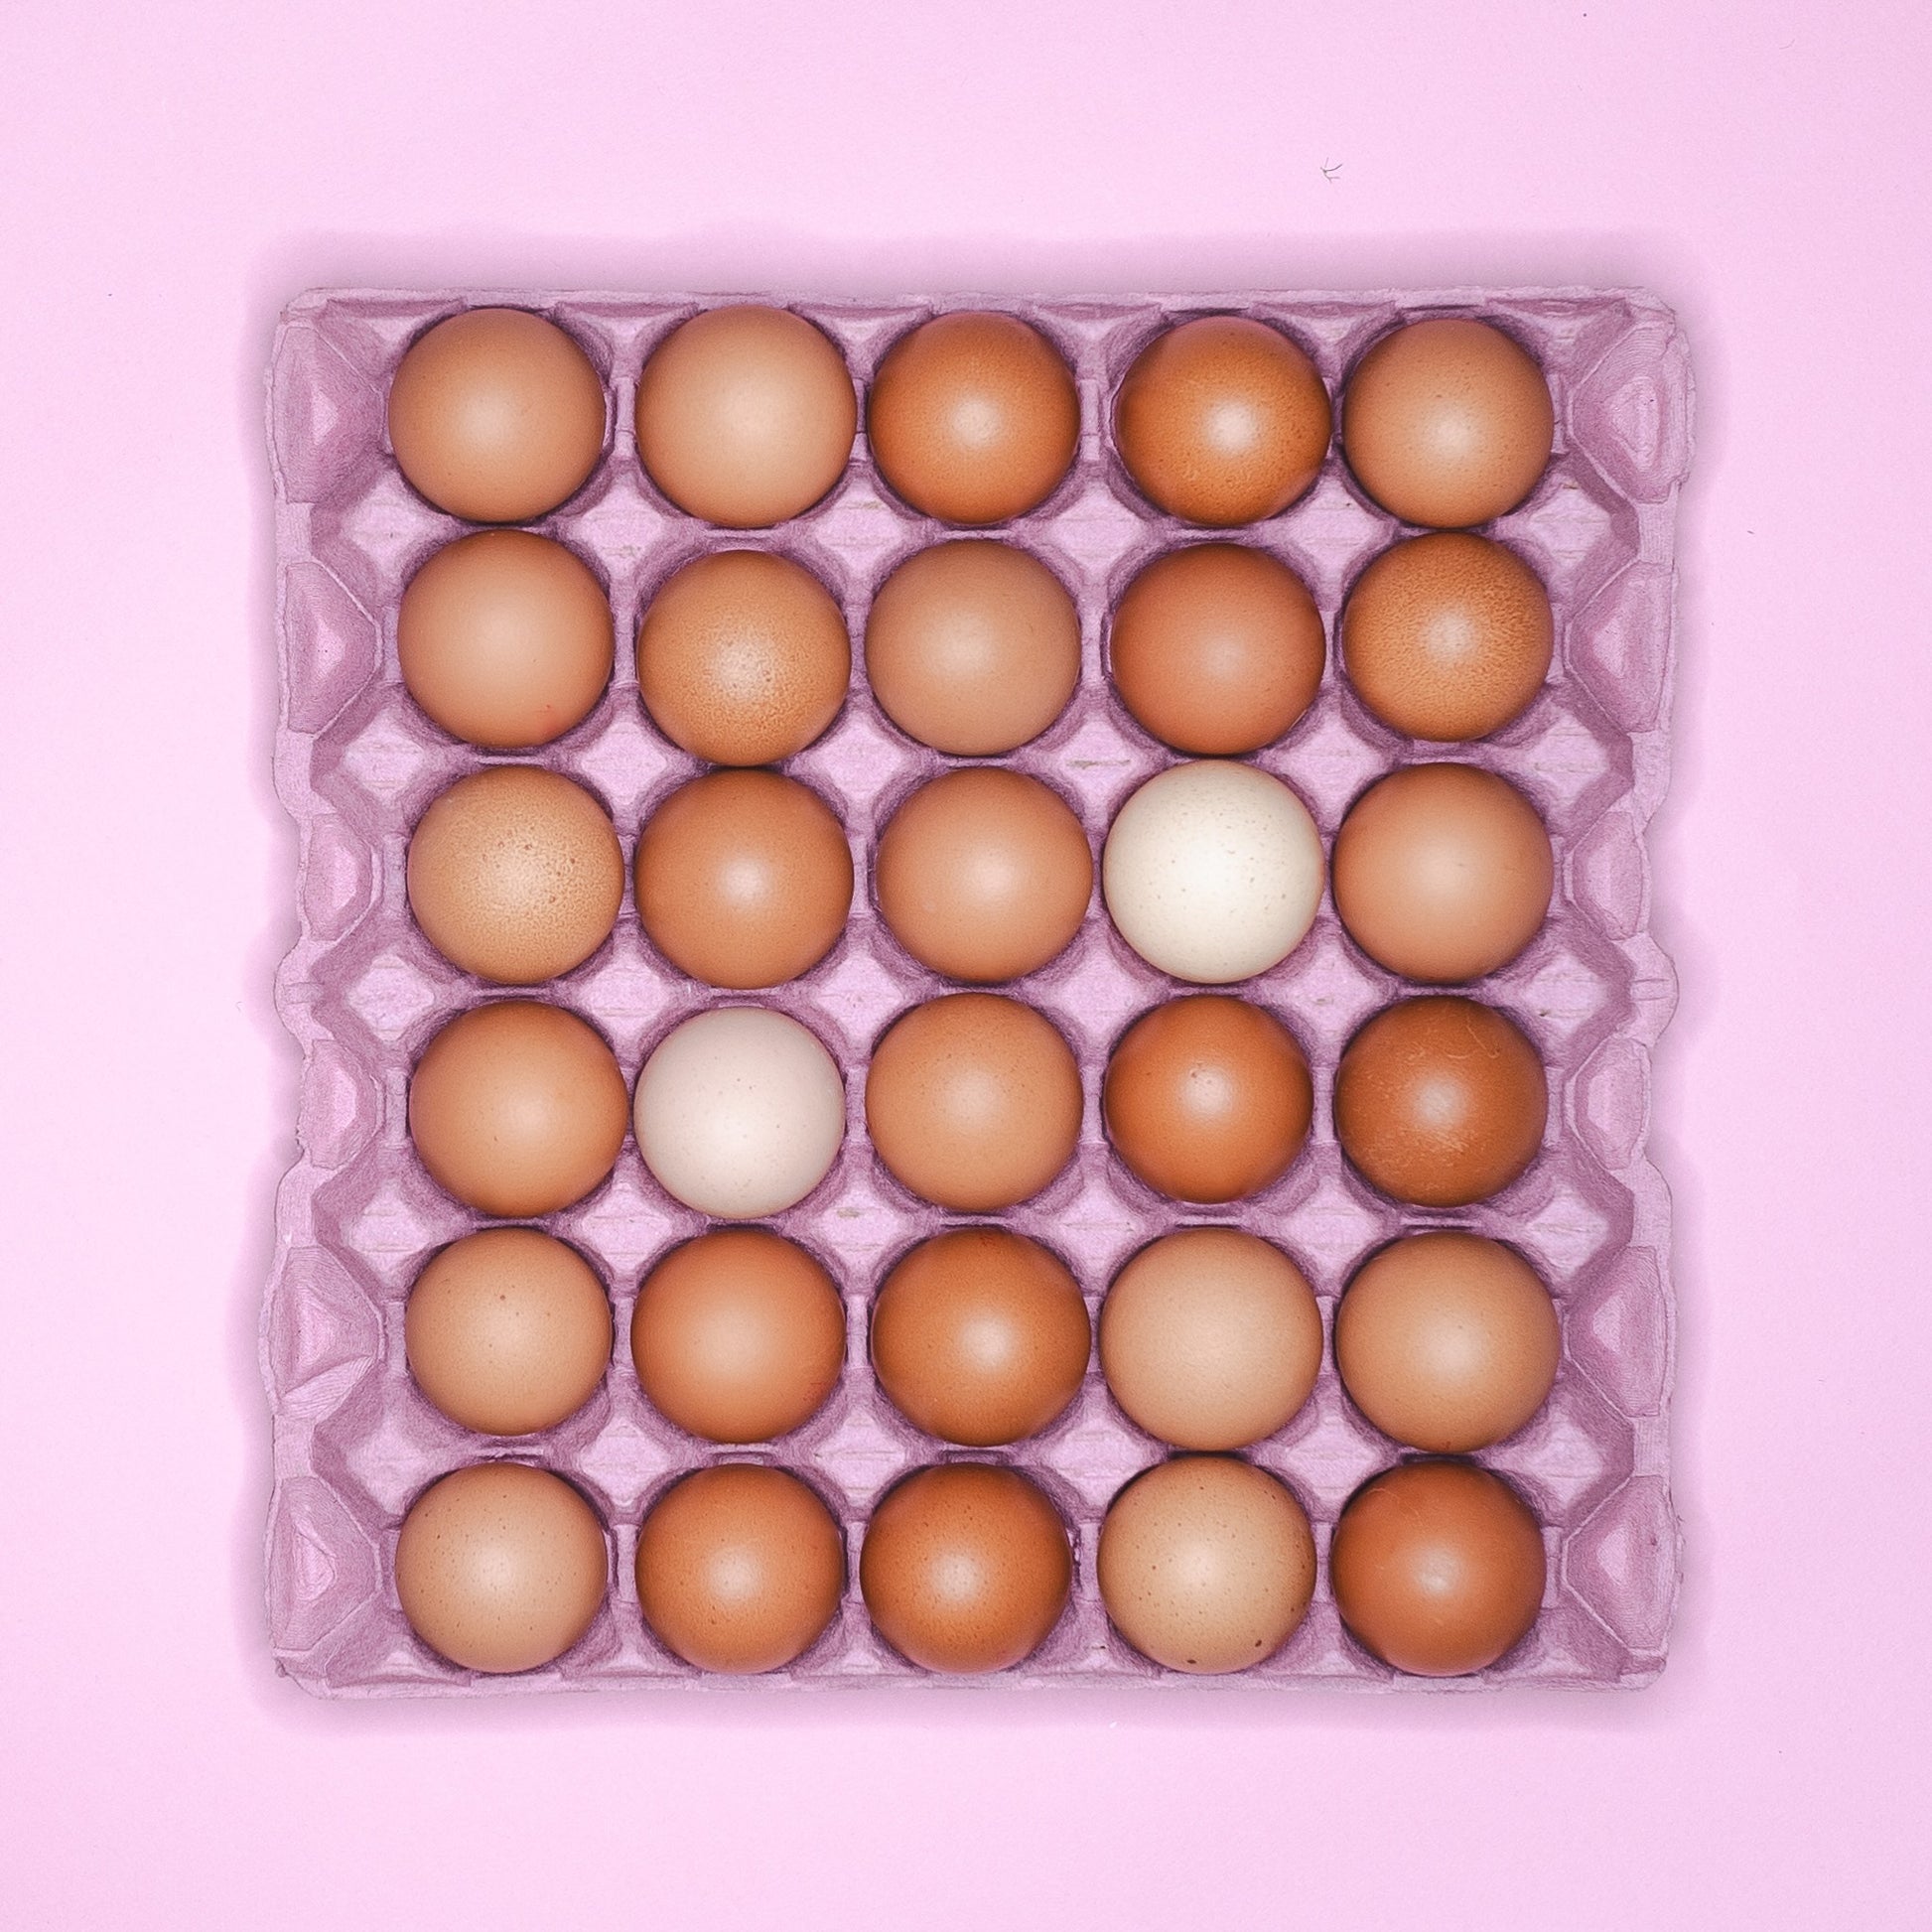 A pink cardboard tray holding 30 eggs